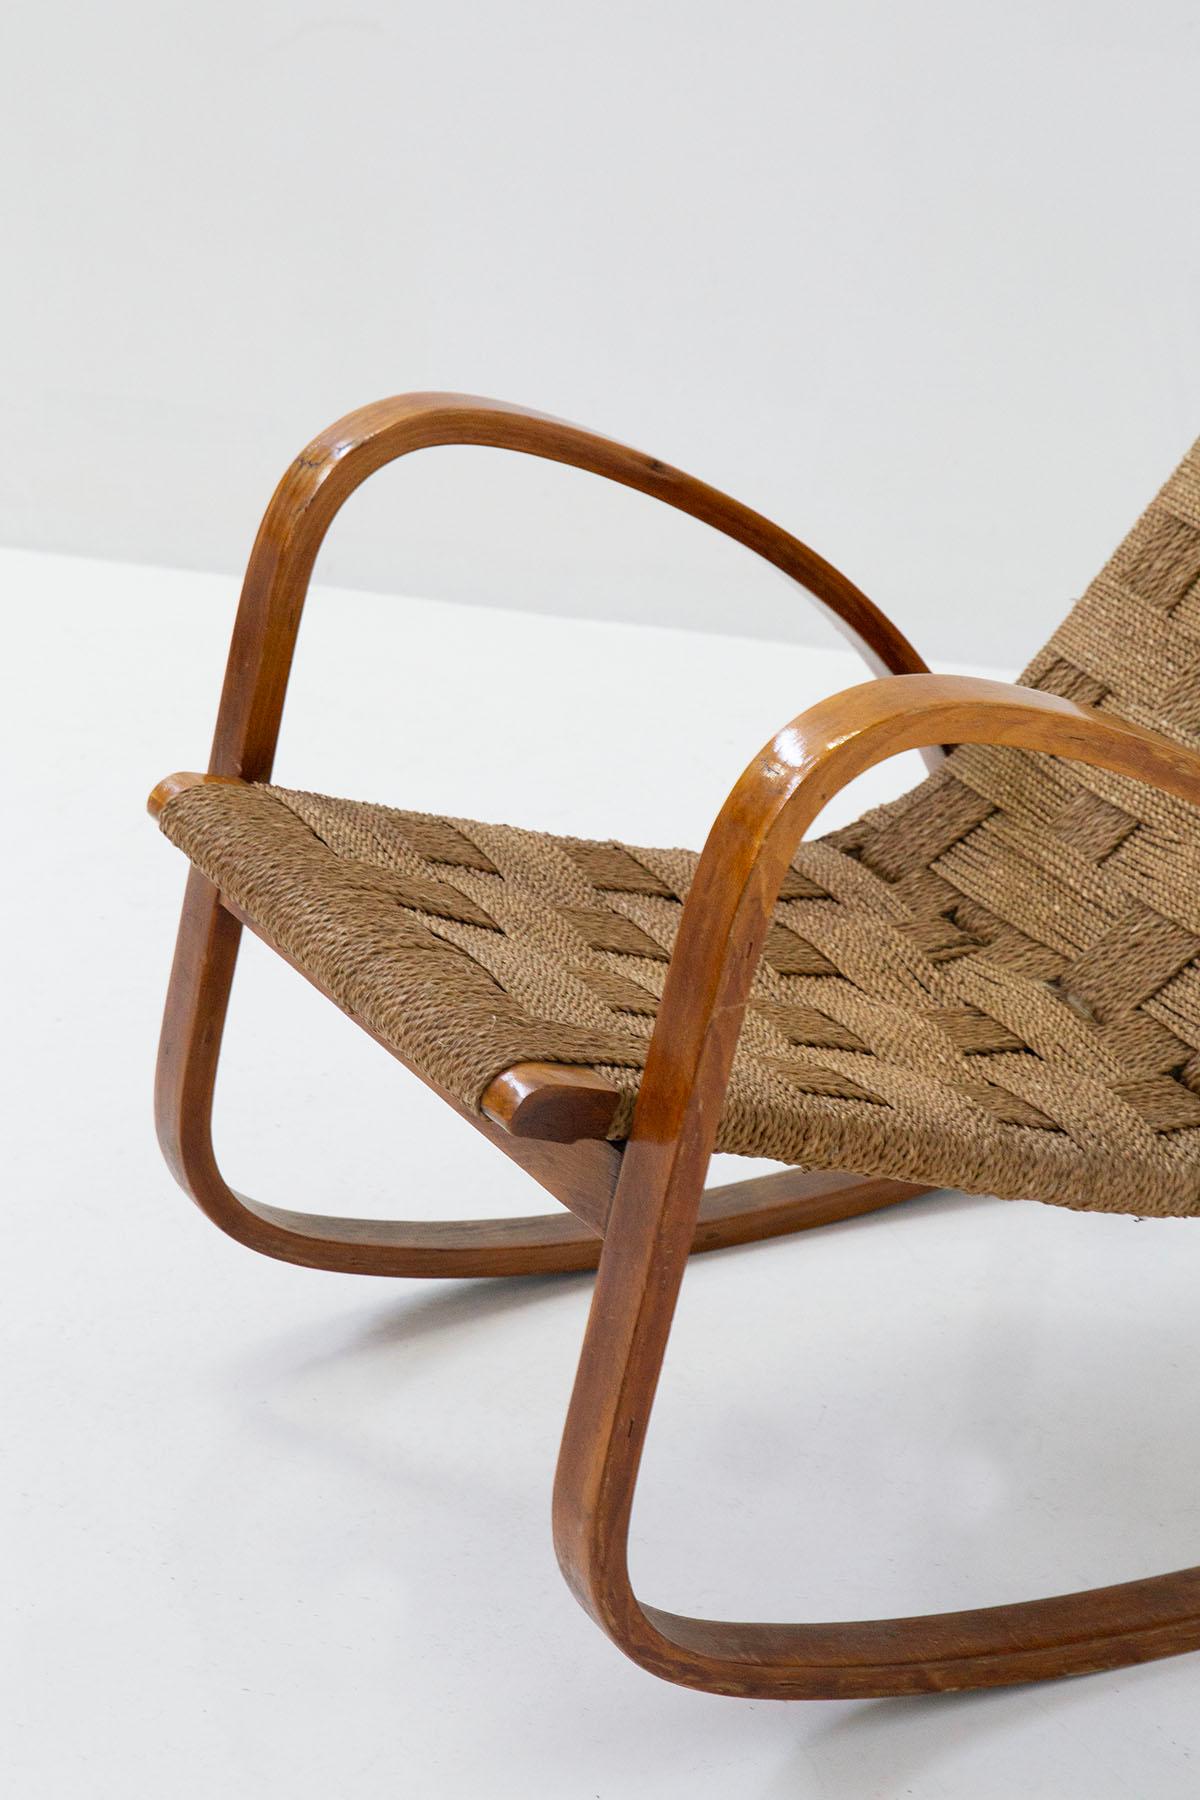 Bauhaus Italian Rocking Armchair from the Rationalist Period, in of Rope